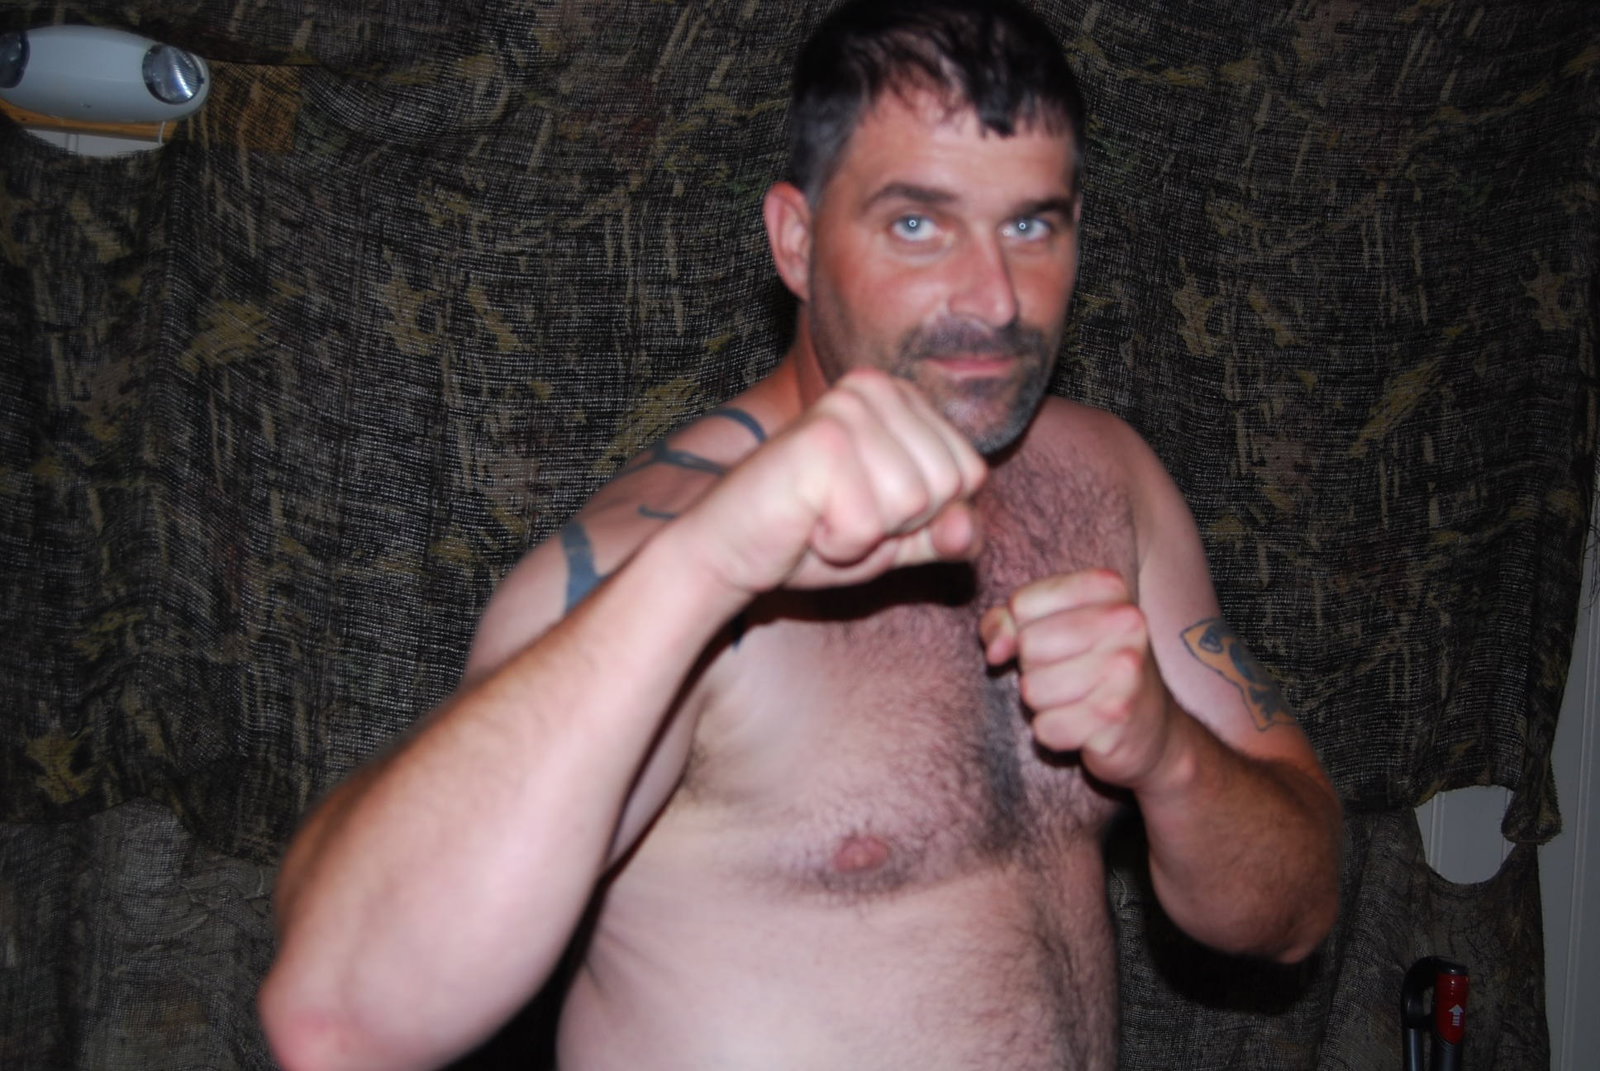 Photo by Hairy Musclebears with the username @hairymusclebears,  September 24, 2019 at 3:27 AM. The post is about the topic GayTumblr and the text says 'hairychest Manly Macho Man from USAFUR.com galleries  #gaybody #gaygames #gayguys #gaymale #gayhunk #hairybelly #BearPhotoADay #gaychubby #gay #bearweek365  #pop #papi #grandpa #grandfather #silverdaddy #silverfox #hairybelly #chub #chubby #husband..'